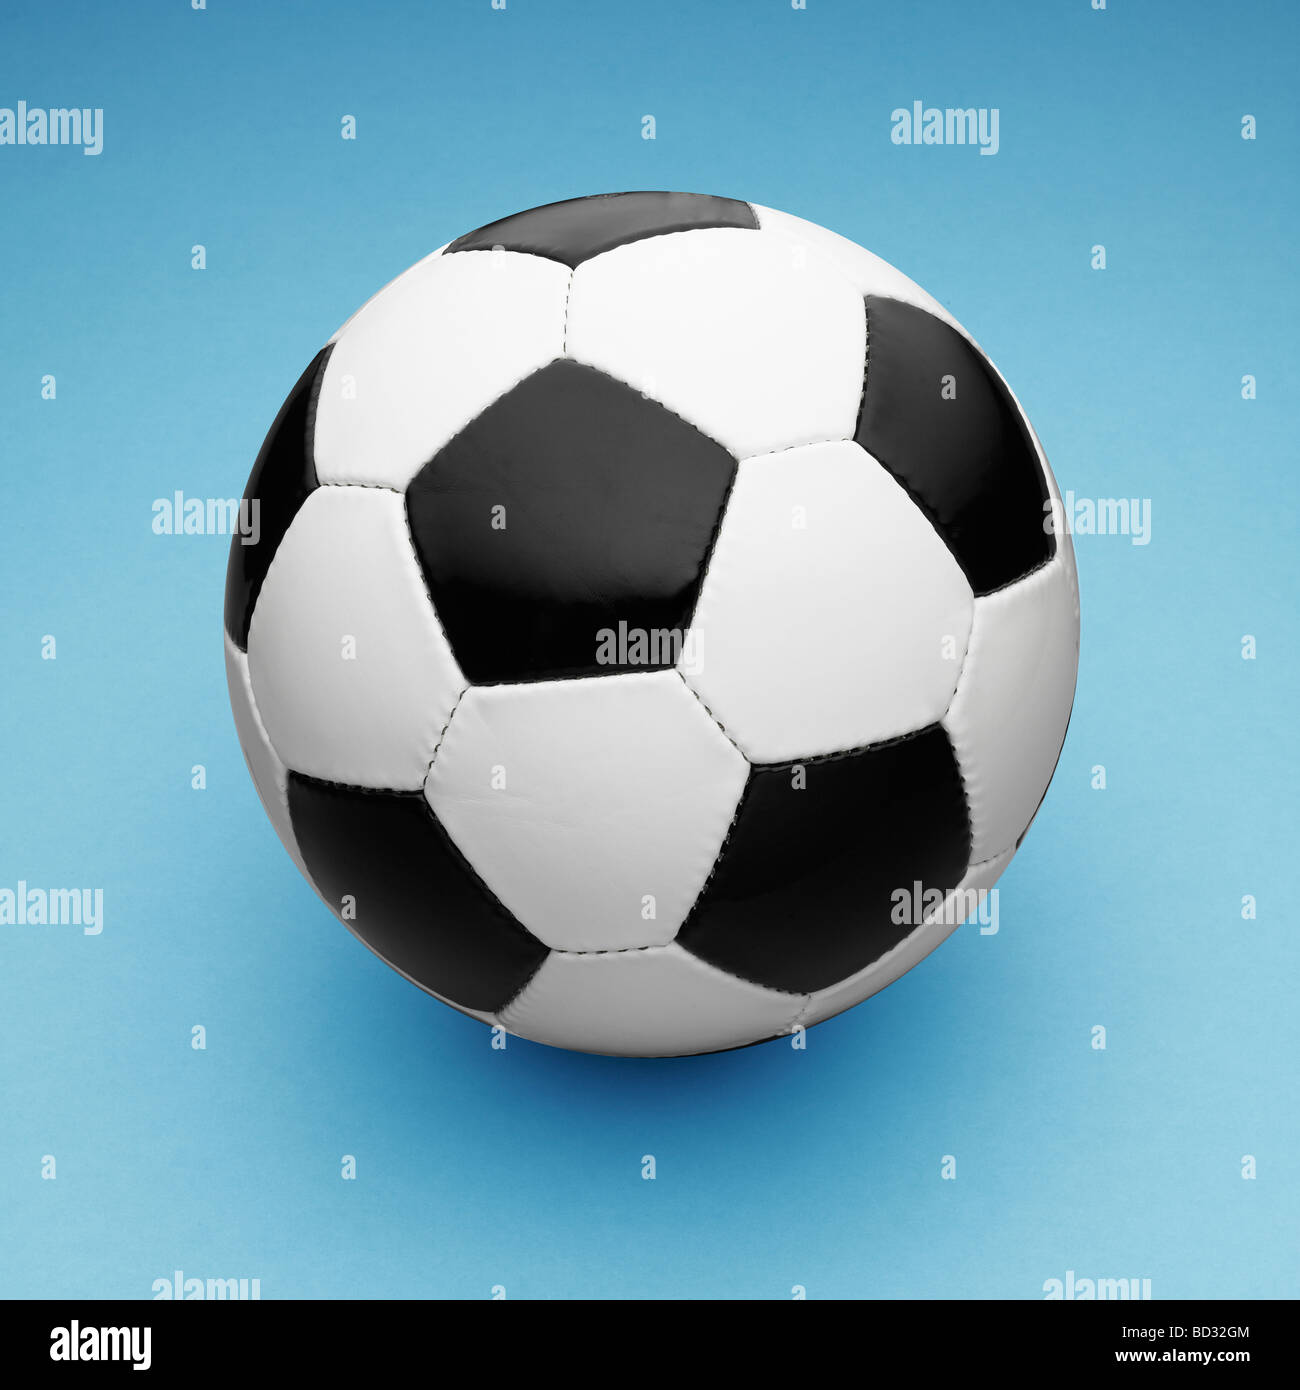 Black and White  Leather Football / Soccer Ball on Blue Background. Stock Photo